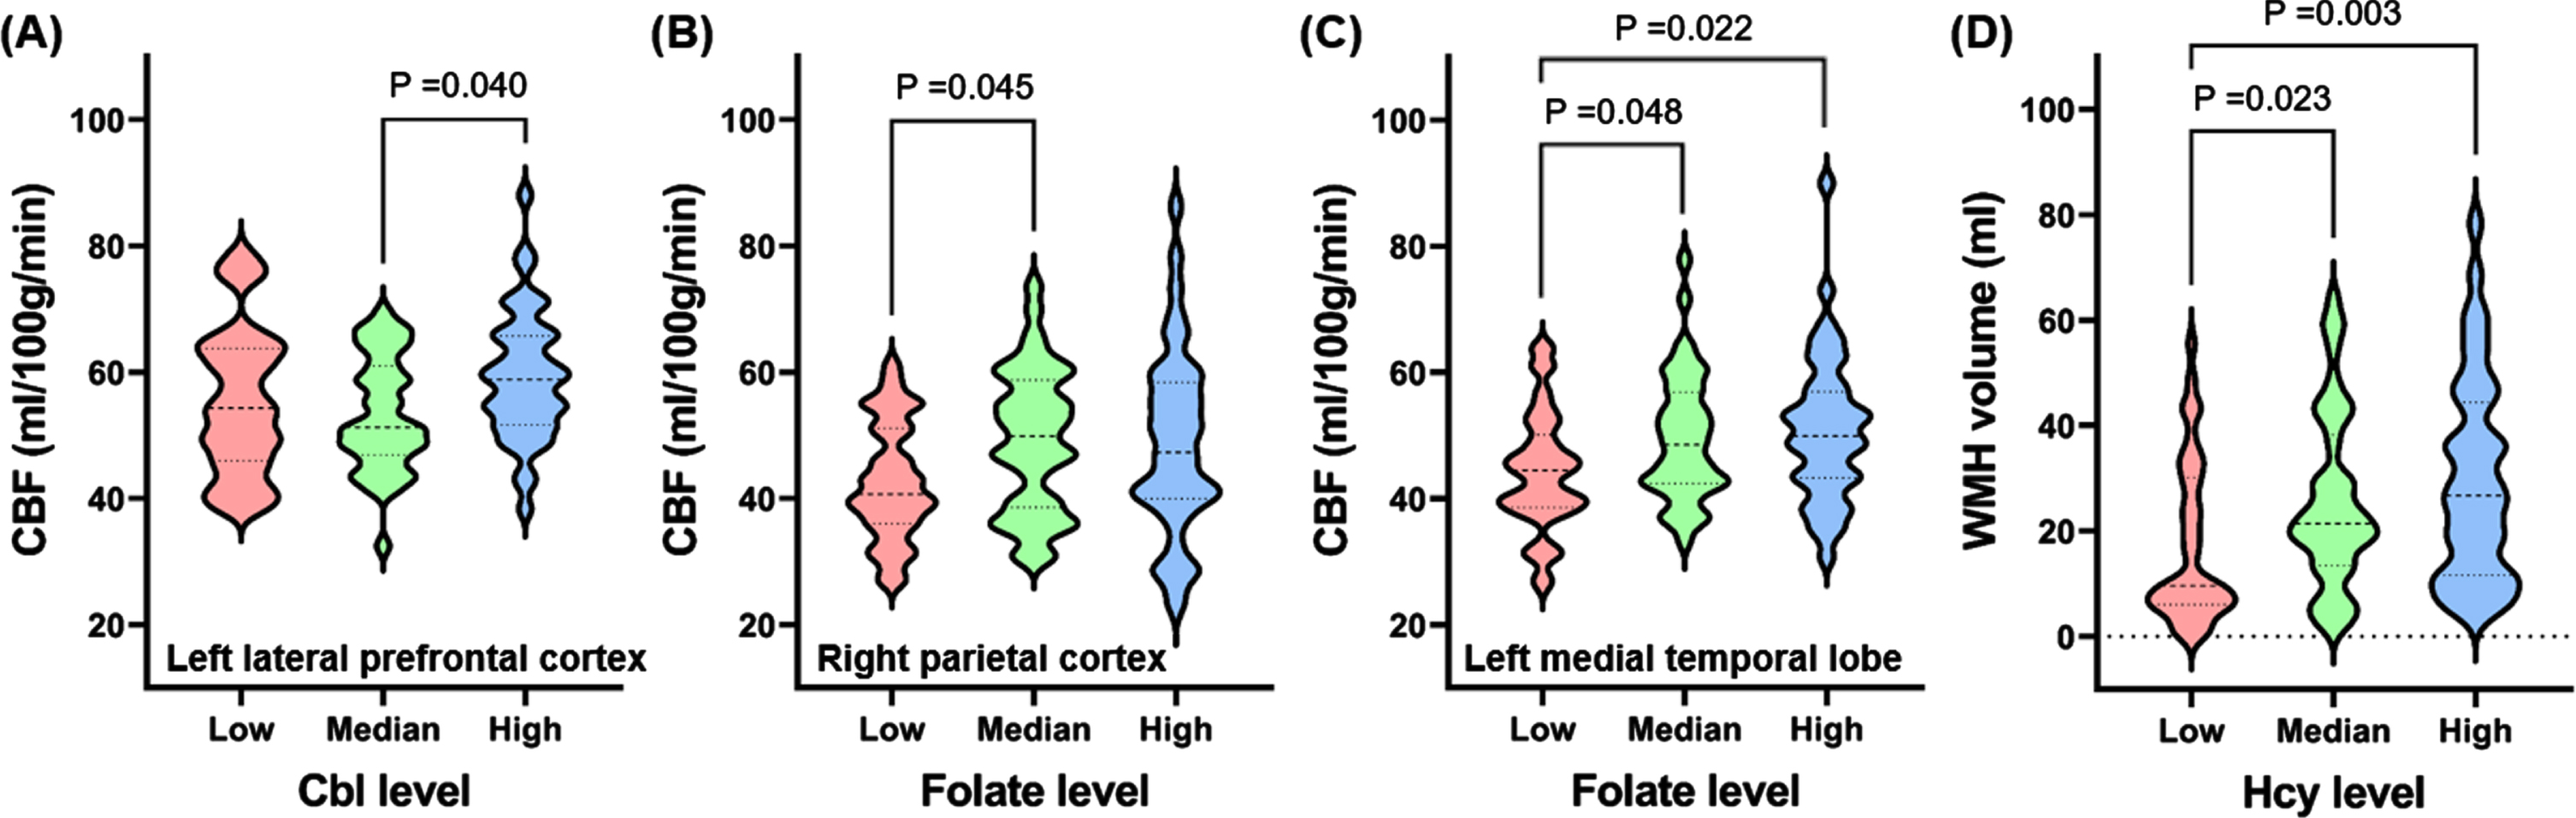 Association between serology metrics and neurovascular image metrics. A) Cerebral blood flow (CBF) comparisons among the groups defined by the tertiles of cobalamin (Cbl) level. Range of Cbl (pg/mL) [Case number] of Low = 85–342 [41]; Median = 348–685 [41]; High = 717–3094 [40]. B, C) CBF comparisons among the groups defined by the tertiles of folate level. Range of folate (ng/mL) [Case number] of Low = 4–9 [41]; Median = 9–15 [41]; High = 15–41 [41]. D) White matter hyperintensity (WMH) volume comparisons among groups defined by the tertiles of homocysteine (Hcy) level. Range of Hcy (μmol/L) [Case number] of Low = 5.58–10.20 [41]; Median = 10.21–14.08 [41]; High = 14.31–36.05 [39]. Two-way analysis of variance showed no significant interaction between dementia subtype and Cbl level (p = 0.319–0.407) or folate level (p = 0.514–0.669) on CBF, and no significant interaction between dementia subtype and homocysteine level on WMH volume (p = 0.545).